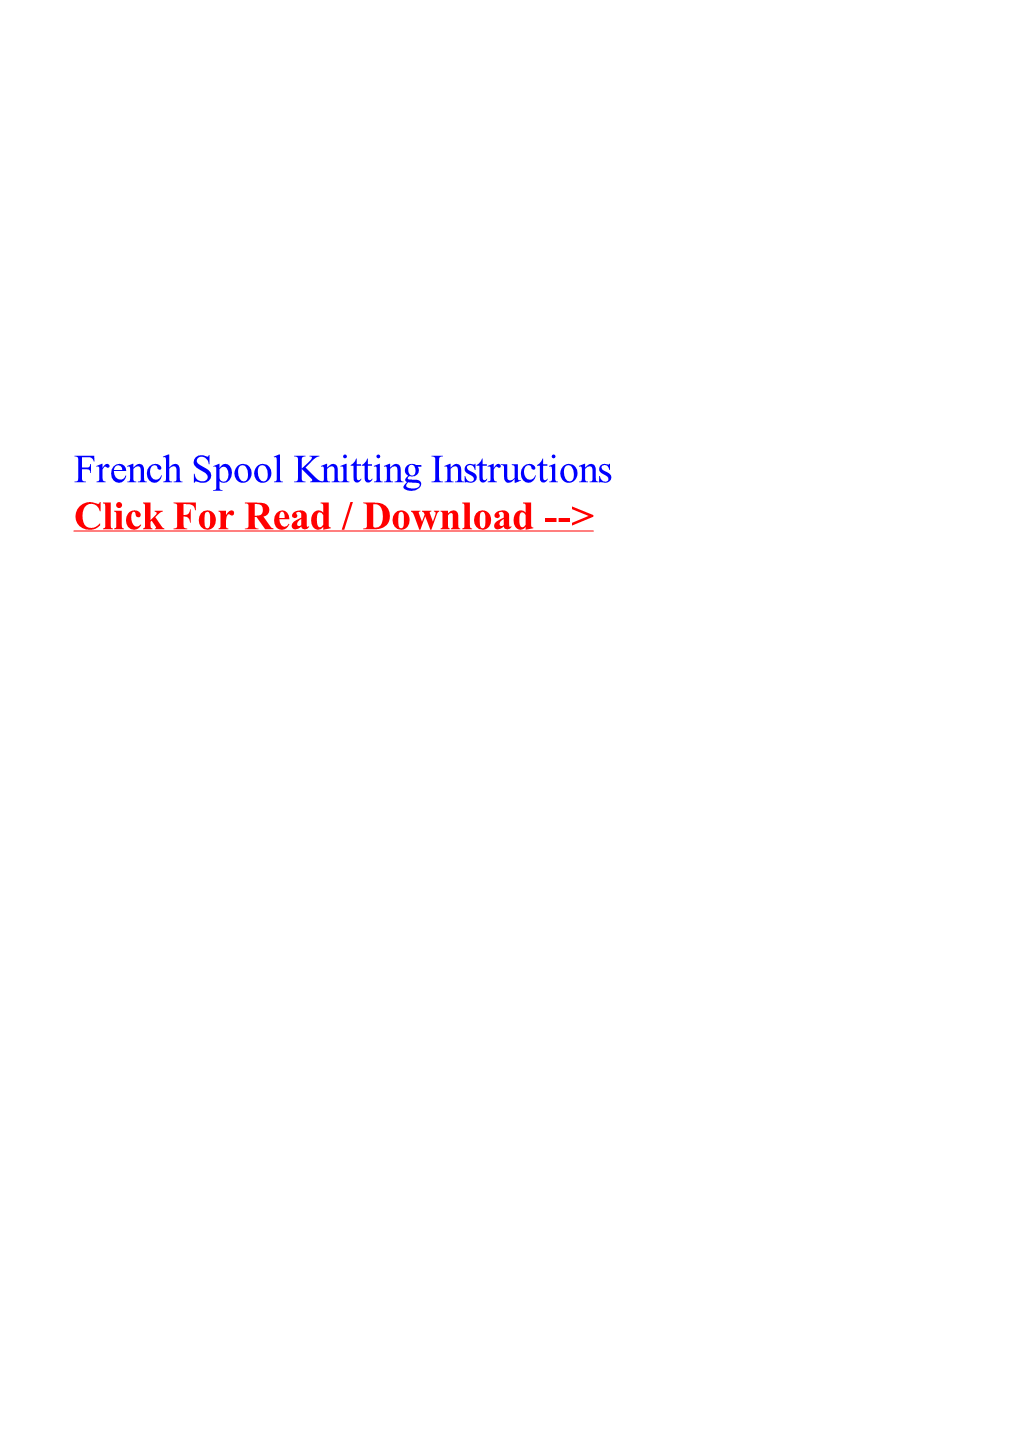 French Spool Knitting Instructions Use an Empty Wooden Thread Spool Or a Cylinder of Wood with a 1/4 Inch Diameter Hole Through the Center